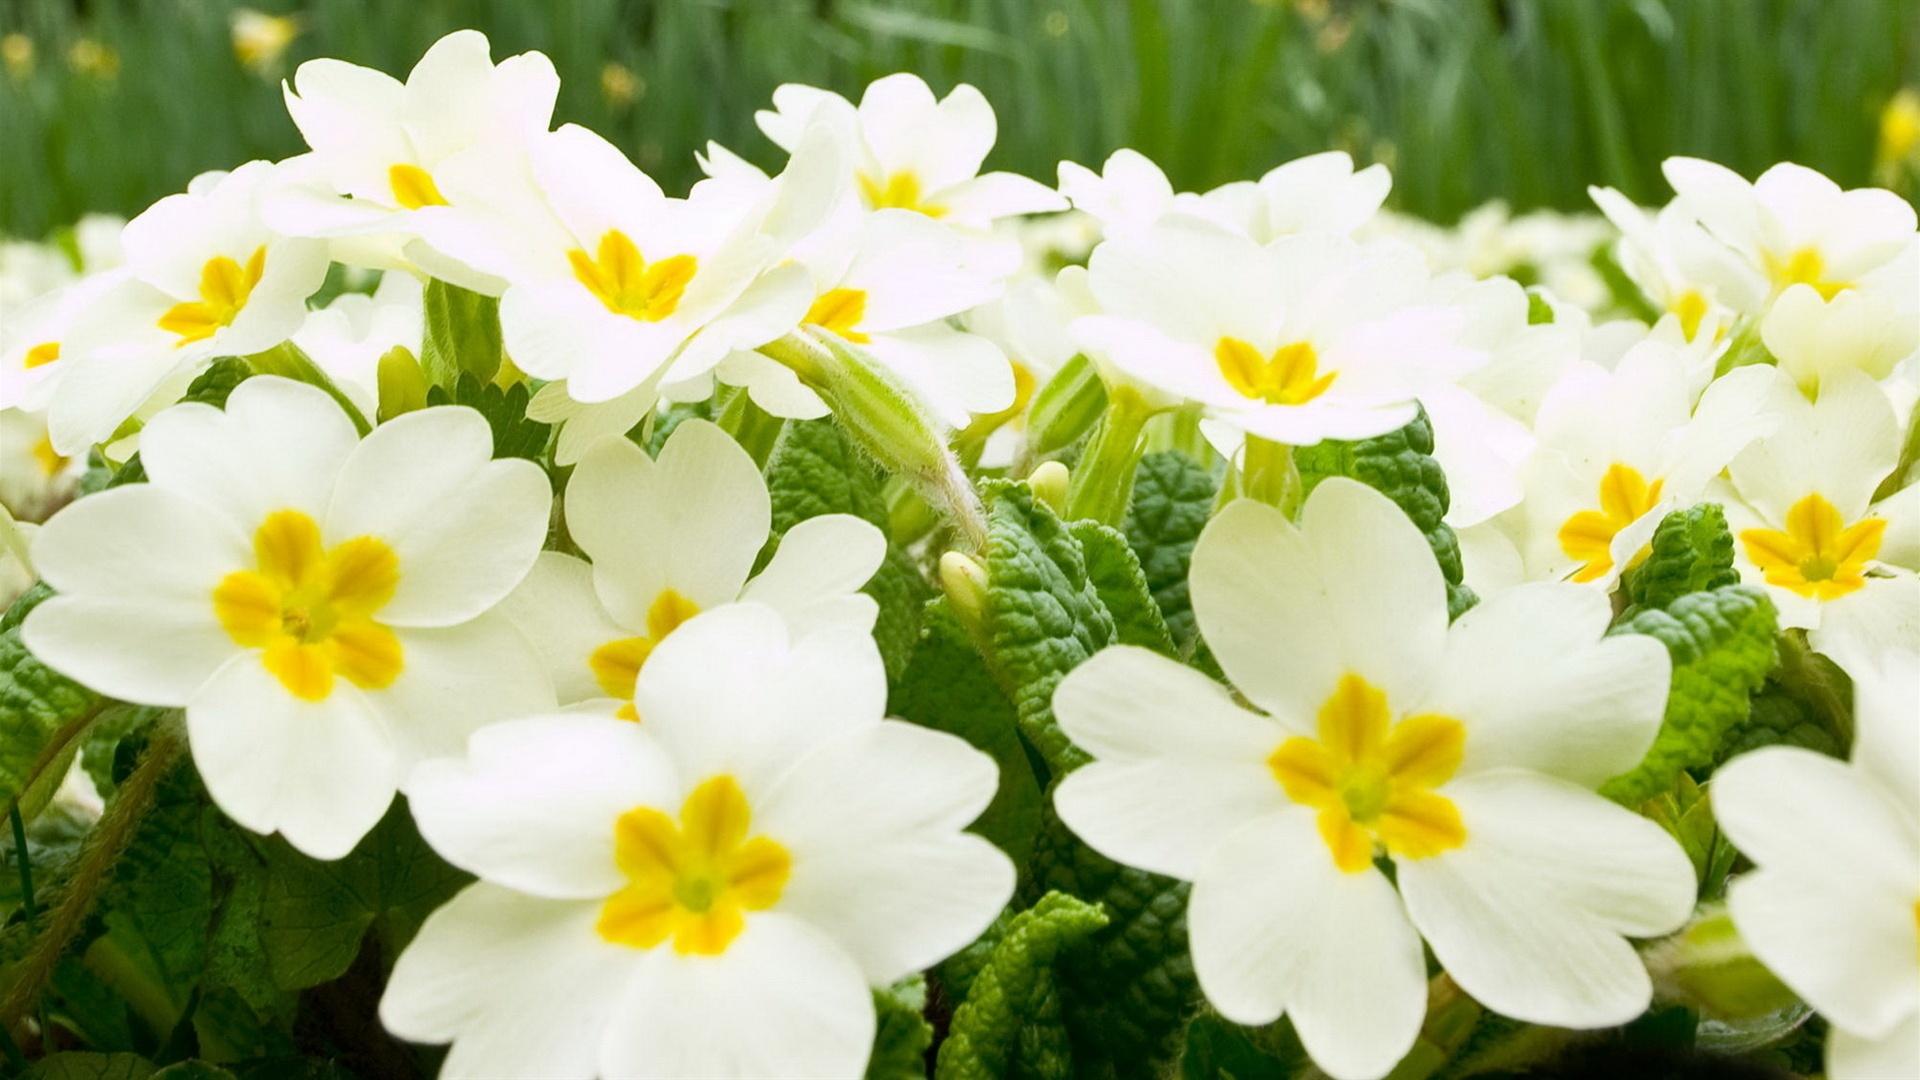 Wallpaper White flowers background 1920x1080 Full HD 2K Picture, Image